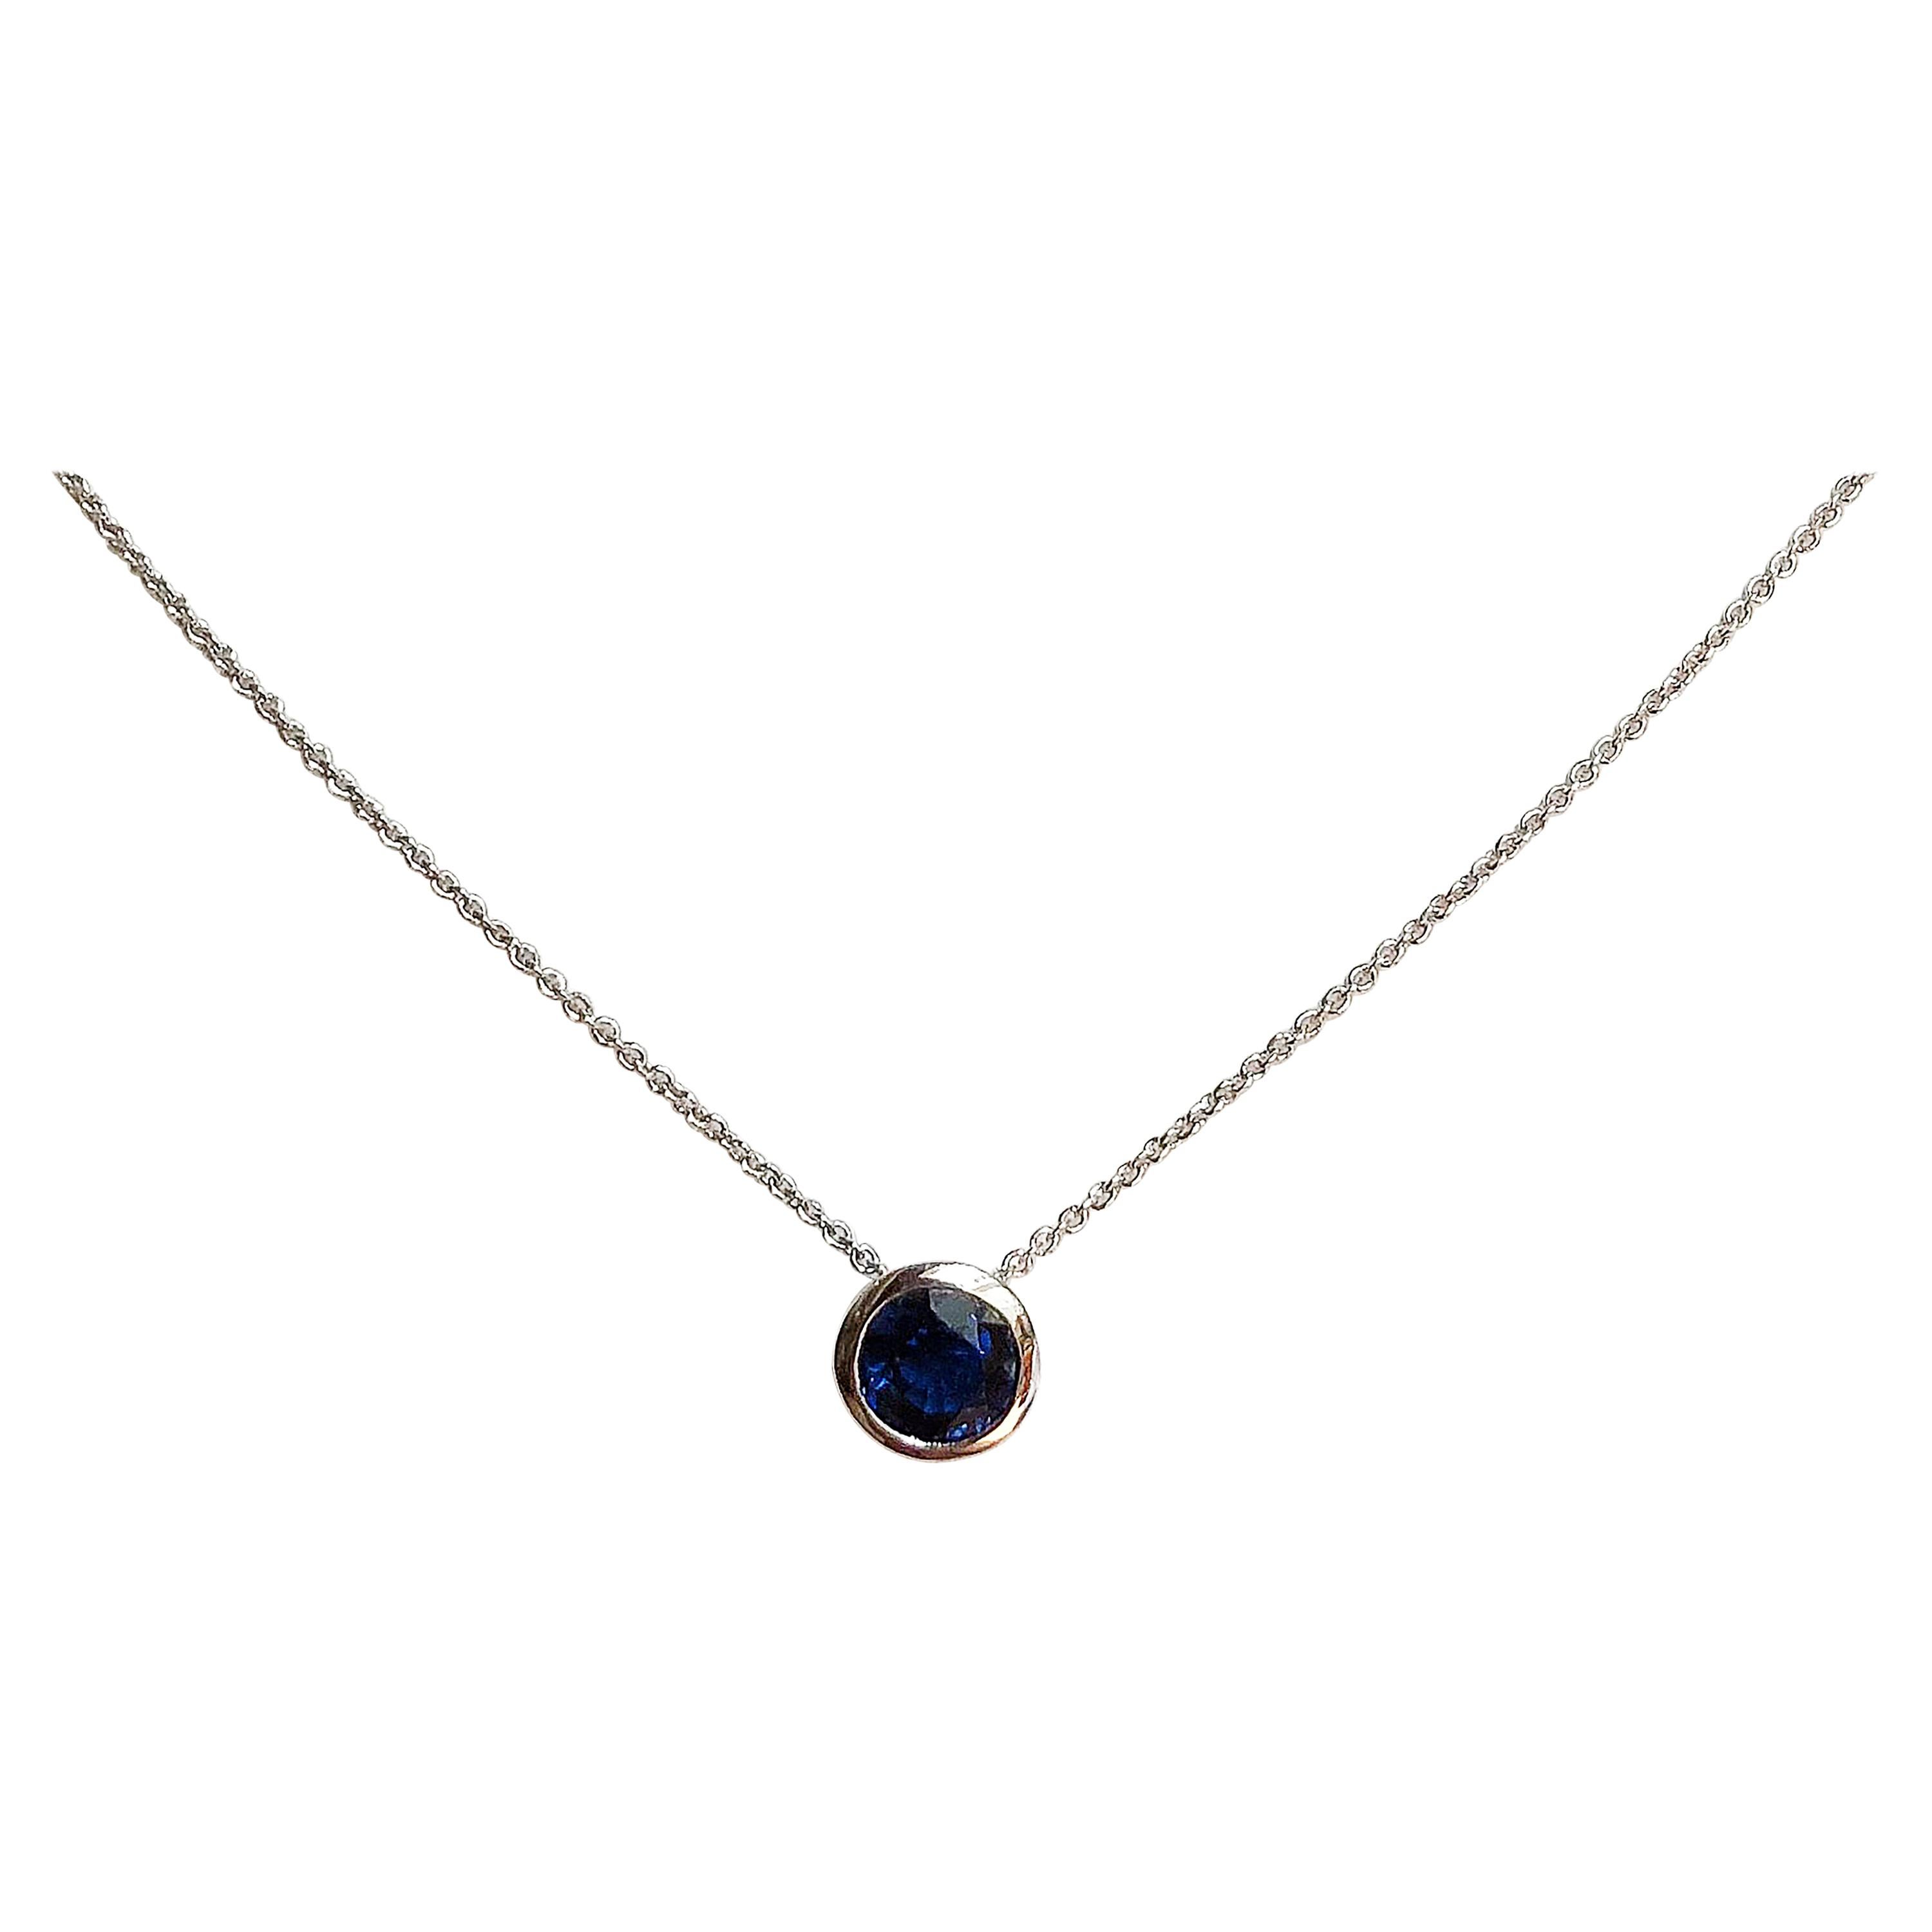 Round Blue Sapphire Necklace Set in 18 Karat White Gold Settings